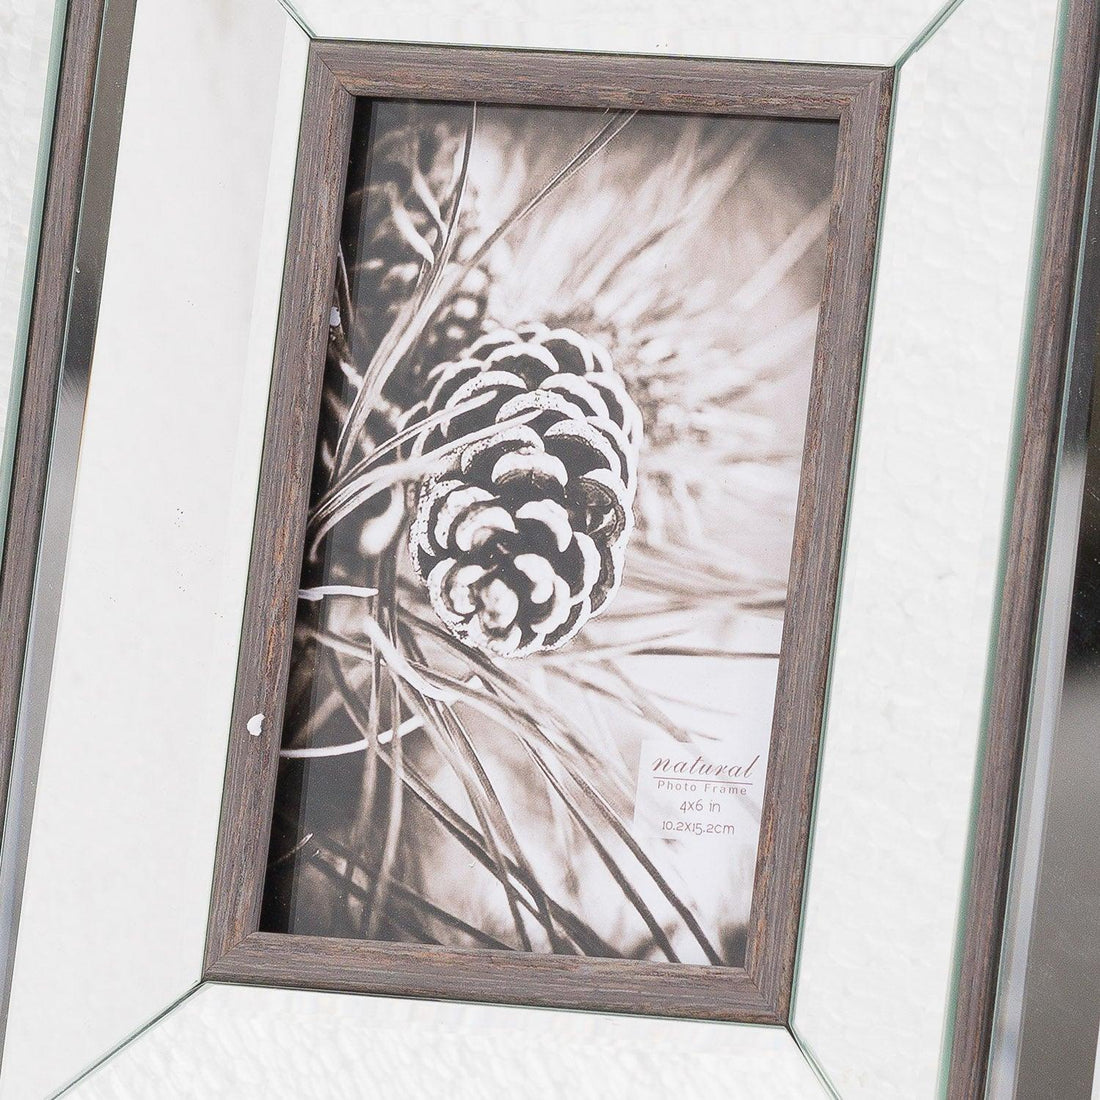 Tristan Mirror And Wood 4X6 Frame - £34.95 - Gifts & Accessories > Photo Frames 